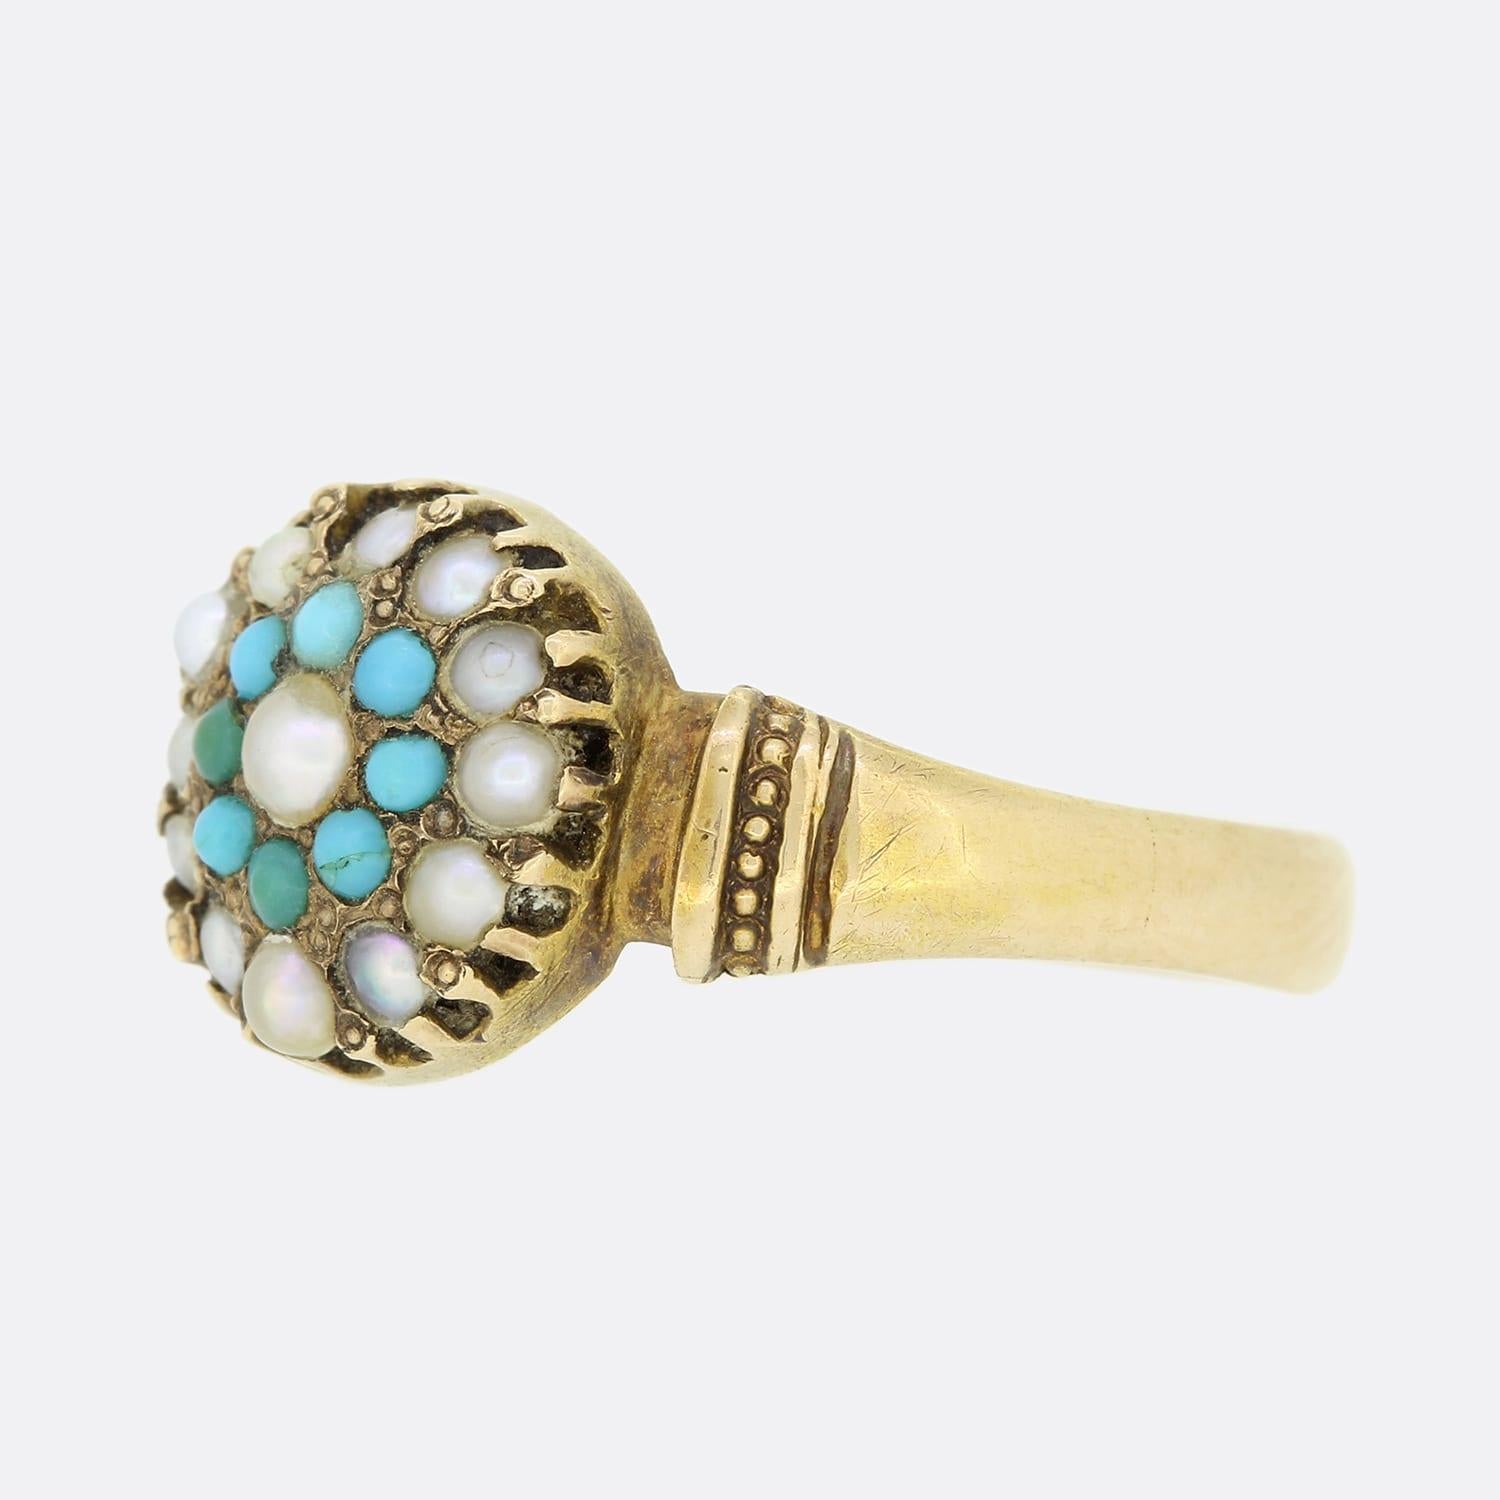 This is a 15ct yellow gold turquoise and pearl cluster ring from the mid Victorian era. Turquoise and pearls were often used together in Victorian jewellery as the vibrant blue works well with the white lustre. Inside the back of the head of the